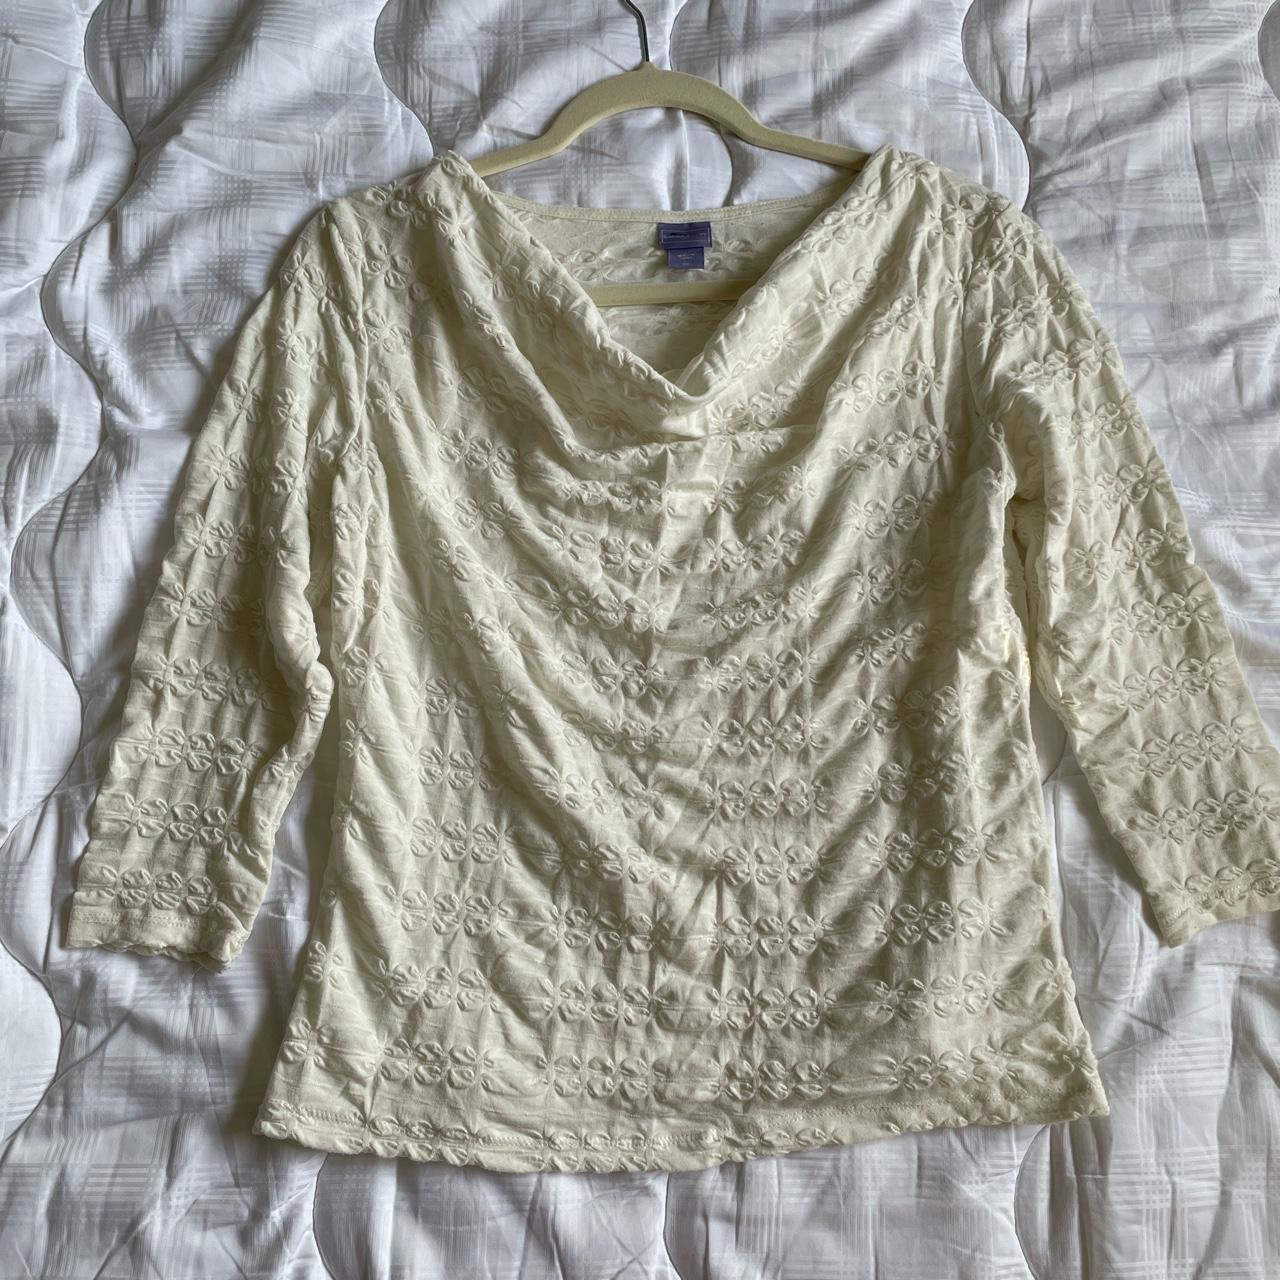 Laura Scott Texturee Blouse Size Small in the color... - Depop